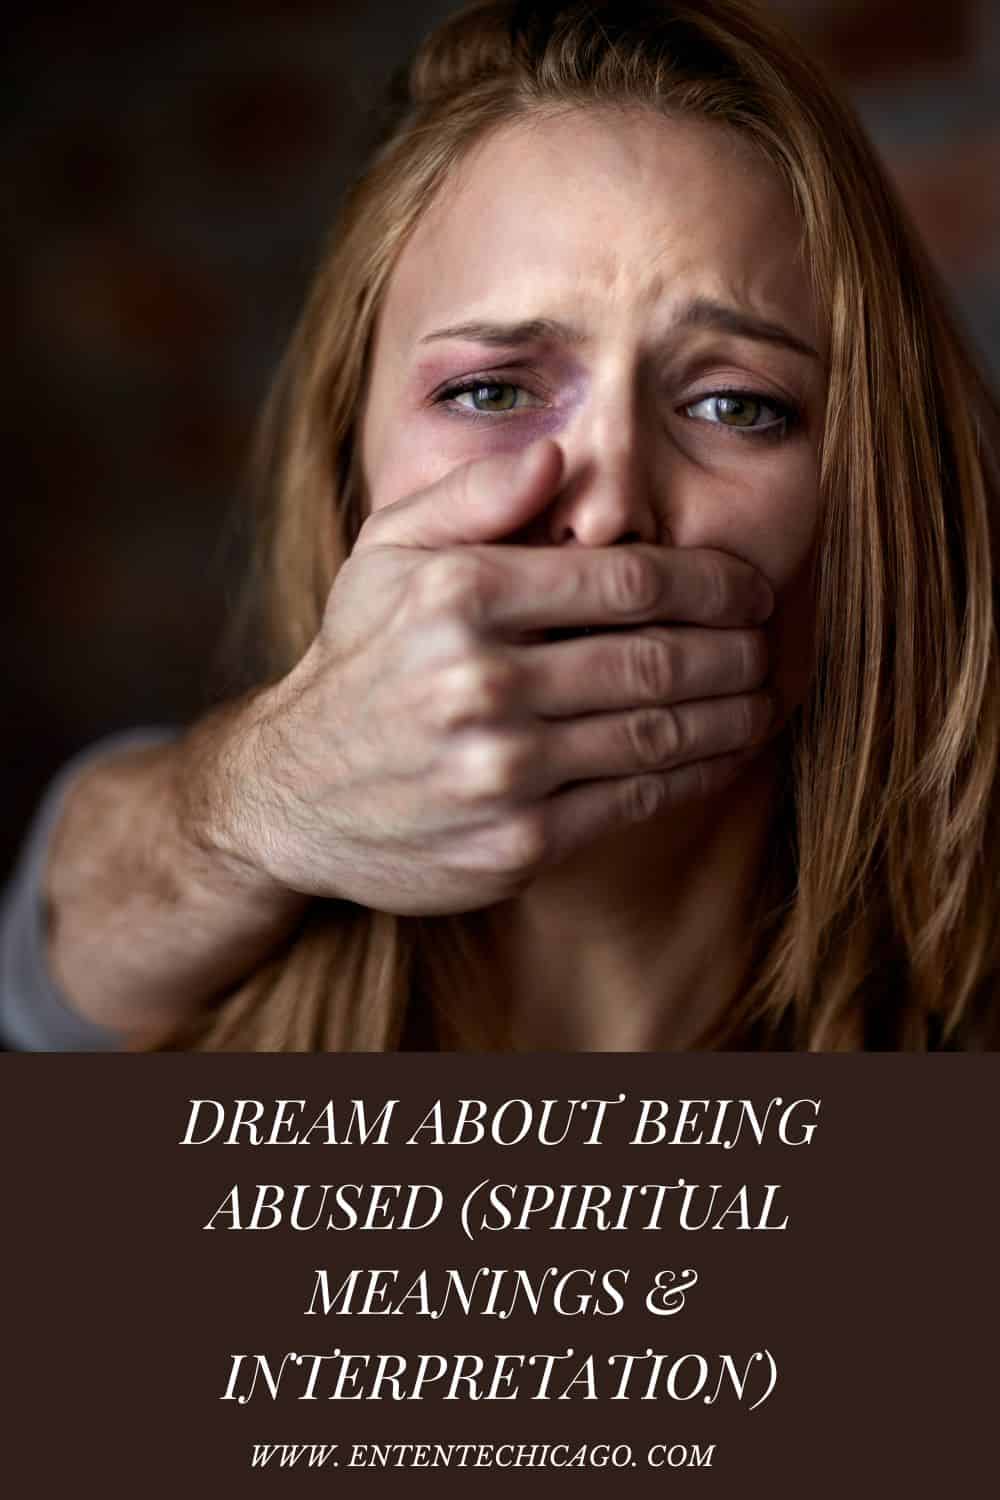 Dream About Being Abused (Spiritual Meanings & Interpretation)